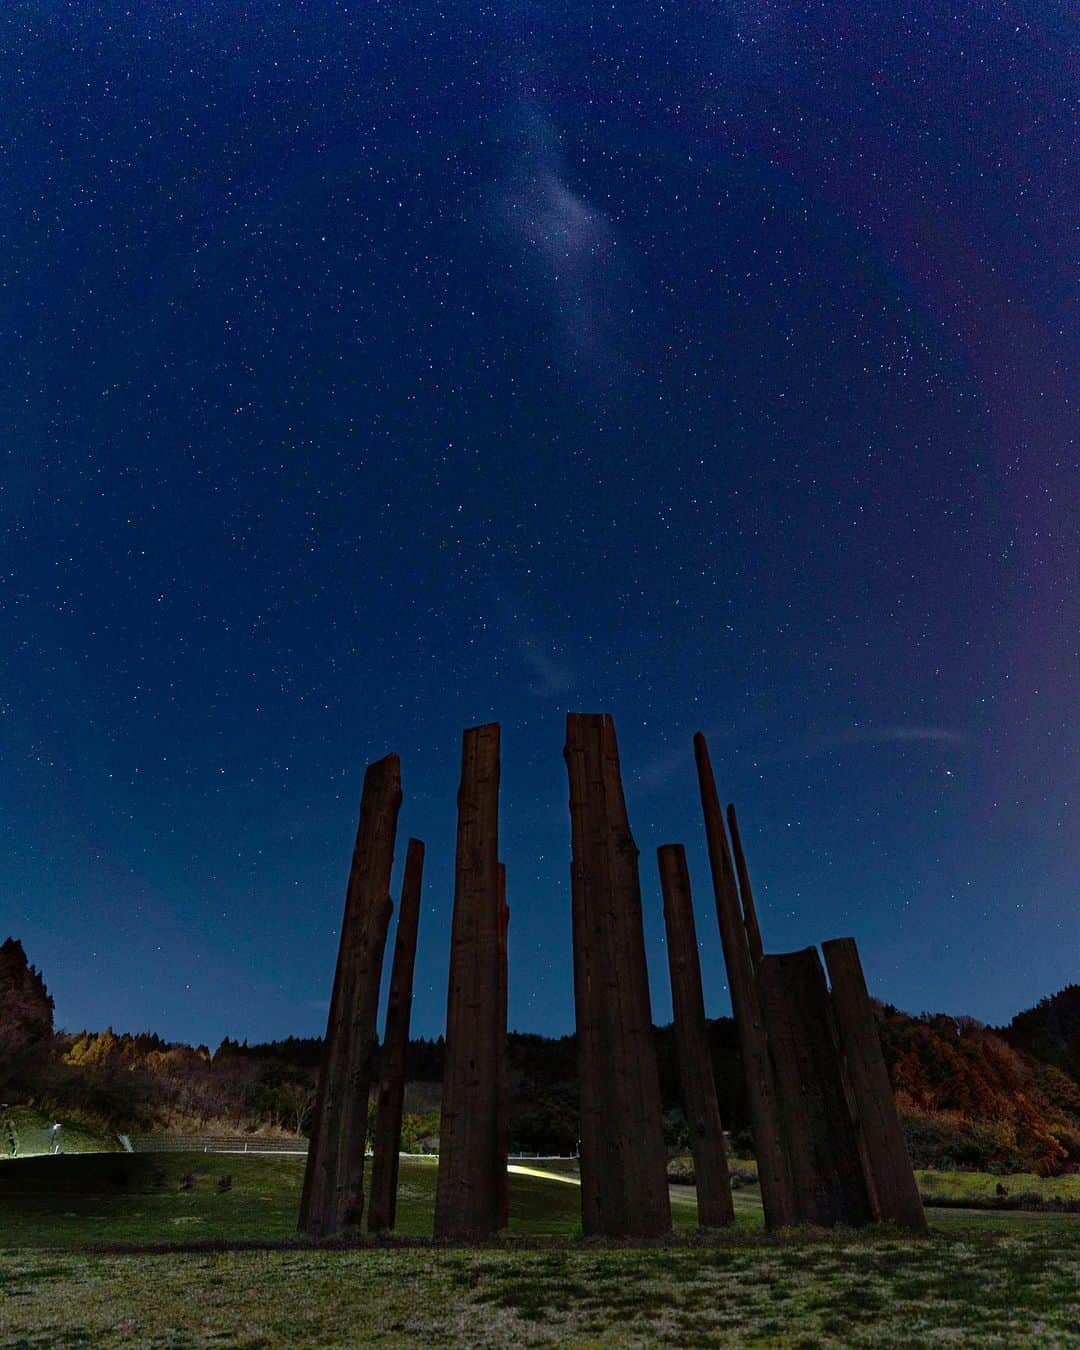 詩歩さんのインスタグラム写真 - (詩歩Instagram)「Starry skies at a Jomon site. The #Mawakisite in Noto Peninsula, Ishikawa Prefecture, is the remains of a Jomon period settlement. That's about 6,000 years ago! It's hard to believe that people have been living on the Noto Peninsula for that long...  The monument in the photo is a reproduction of a special type of remains called "ring-shaped wooden column", which has been excavated only in Hokuriku. The use of the columns is still a mystery and they have been rebuilt in the same place over and over again. Hmmm, ancient romance. It's a bit like Stonehenge...!  The ruins themselves are accessible even at night (is that okay?!). The surrounding area is completely dark, so you can even see the stars at night. On the day I took this photo, the moon conditions were not good, so I couldn't get a good shot... but if it's a new moon day, I'm sure you'll be able to see an amazing starry sky...! Next to the ruins, there is a hot spring inn called "Mawaki Pole Pole", so it is recommended to stay here and come to see the starry sky.  🌠  縄文遺跡で見る星空  石川県能登半島にある　#真脇遺跡 は、縄文時代の集落の遺跡。縄文時代がどれくらい前かというと、なんと約6,000年前！！！  そんなにも昔から、この能登半島には人が住んでいたなんて…。古代史好きな歴女のワタクシ、たまりません🤤  遺跡自体はとても広いエリアなのですが、特に注目なのが写真のモニュメント。「環状木柱列」と呼ばれる、北陸だけで出土している特殊な遺構が再現されています。  利用用途は「未だに謎」らしく、柱も同じ場所で何度も何度も立て替えられているとか。うーん、古代ロマン😍ちょっとストーンヘンジっぽくない…！？  遺跡自体は夜でも立ち入ることができて、（それでいいのか！？）周囲は真っ暗なので夜には星空を見ることもできます。私が撮影した日は月の条件が良くなかったので、力不足でうまく撮れませんでしたが・・・新月の日ならきっとすごい星空が見れるはず…！★  遺跡の横に「縄文温泉の宿 真脇ポーレポーレ」という温泉宿があるので、ここに泊まって星空を見に来るのがおすすめ◎  でも、やはり墓の遺跡などもある場所なので、なんとも言えない雰囲気がありまくり（笑）ひとりでは絶対に怖くて来れなかっただろうな、と思いました😂ぜひ誰かと一緒にお越しください！！！  🚃  お仕事で北陸3県を巡ってきました！  #shiho_hokuriku のタグで 富山 / 石川 / 福井 の写真をpostしていきます📷お楽しみに〜✨  🙏旅行を検討中の方へ﻿ 緊急事態宣言解除後も、引き続き感染症対策は必要です！  政府や自治体が発表している新型コロナウイルスの最新情報を確認し、遠方の感染拡大エリアへの訪問は控えるなどご自身で判断をお願いします。﻿#withコロナ旅行 での感染対策方法についてはyoutubeに動画をあげています。  @hotishikawa_tabinet  @nototown_tourism  📷 2021 📍真脇遺跡／石川県　能登町 📍Mawaki Remains／Ishikawa Japan #shiho_ishikawa  ©詩歩 / Shiho」4月11日 10時42分 - shiho_zekkei